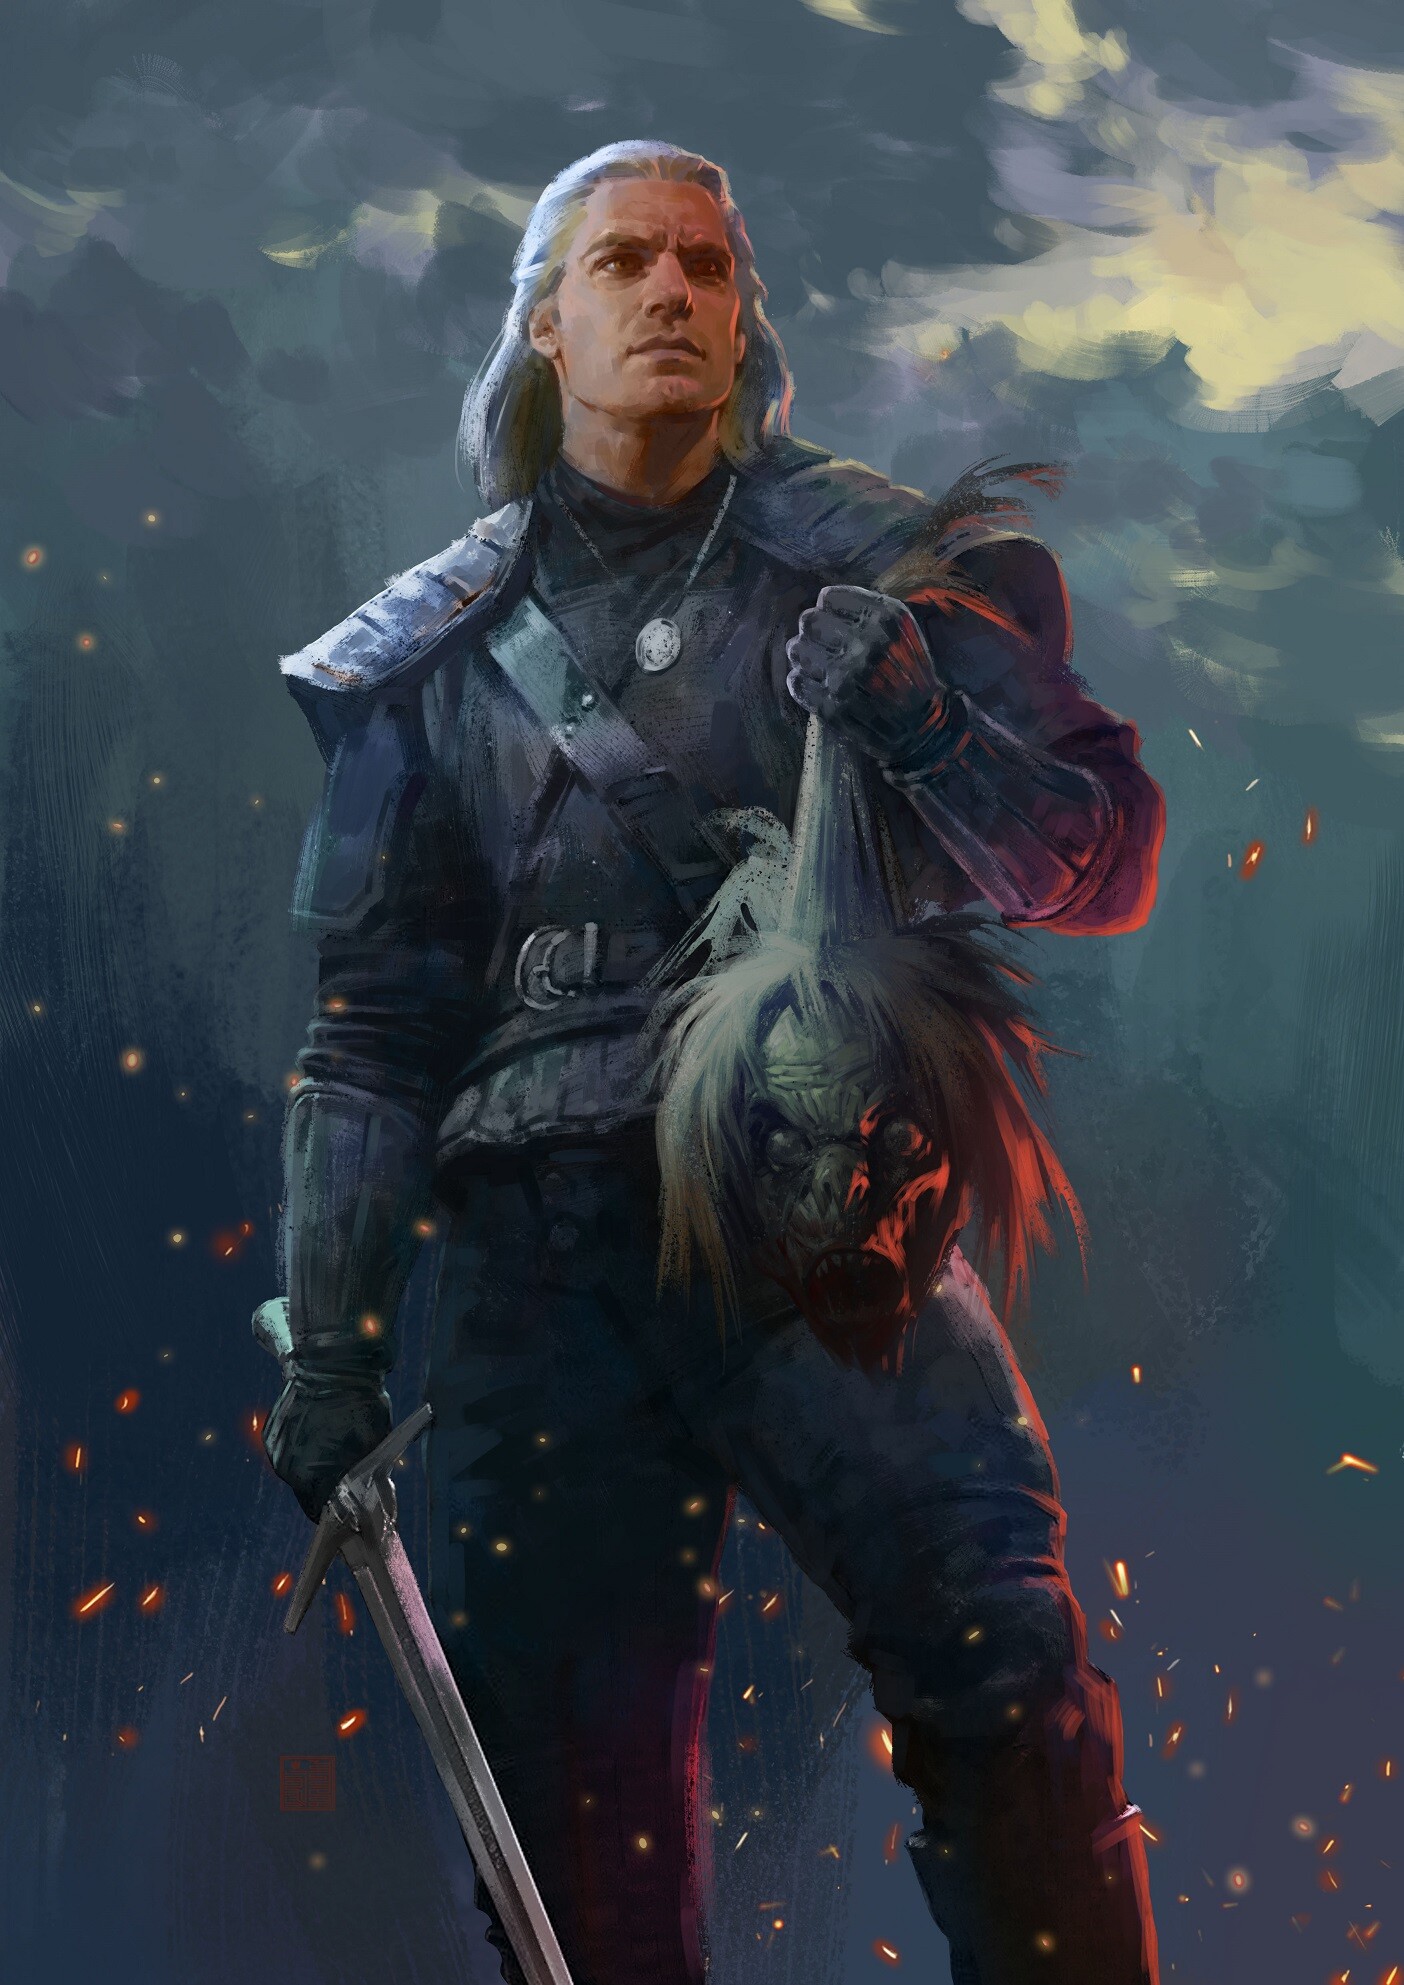 The Witcher Art by miracleon 08